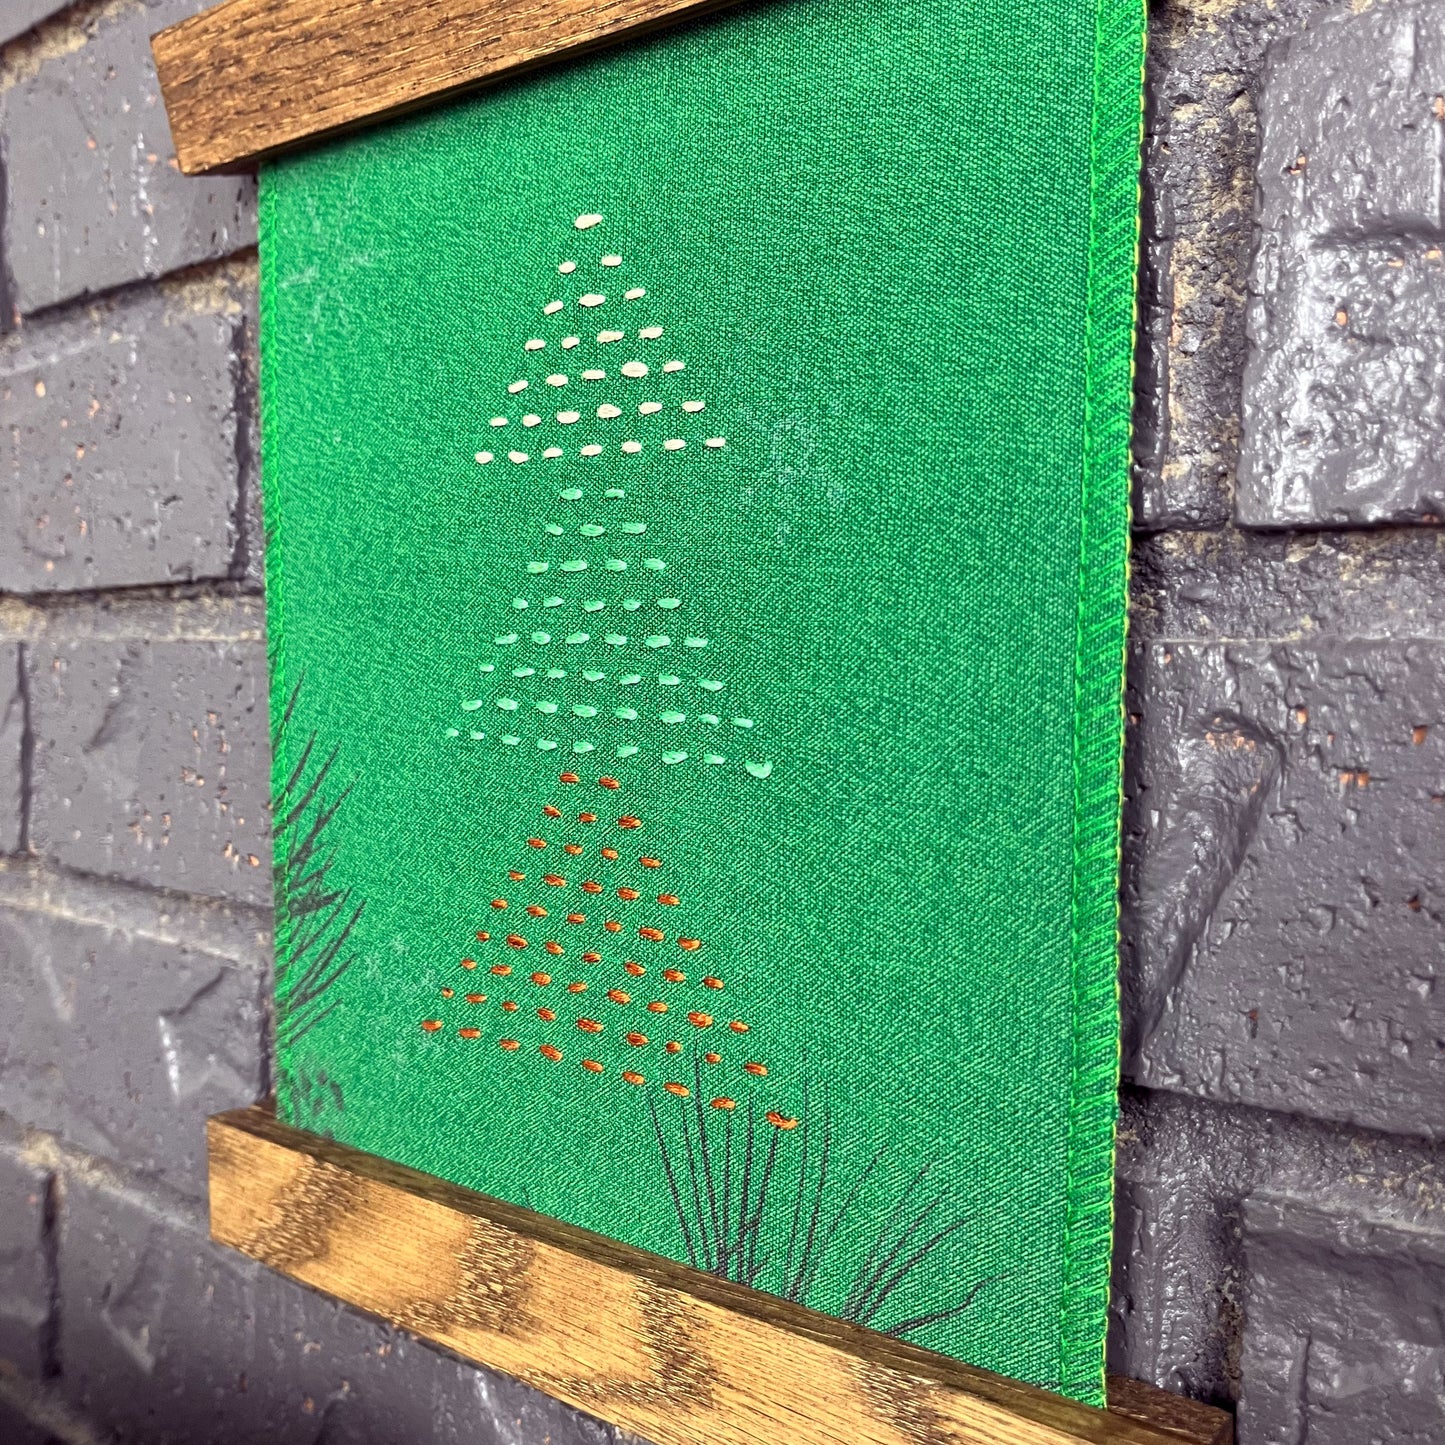 a fabric wall hanging in a magnetic wood frame, made from bright green fabric with pine branches printed on it, and stitched over with Christmas trees made from three triangles, each triangle made from running stitches in red green and peach